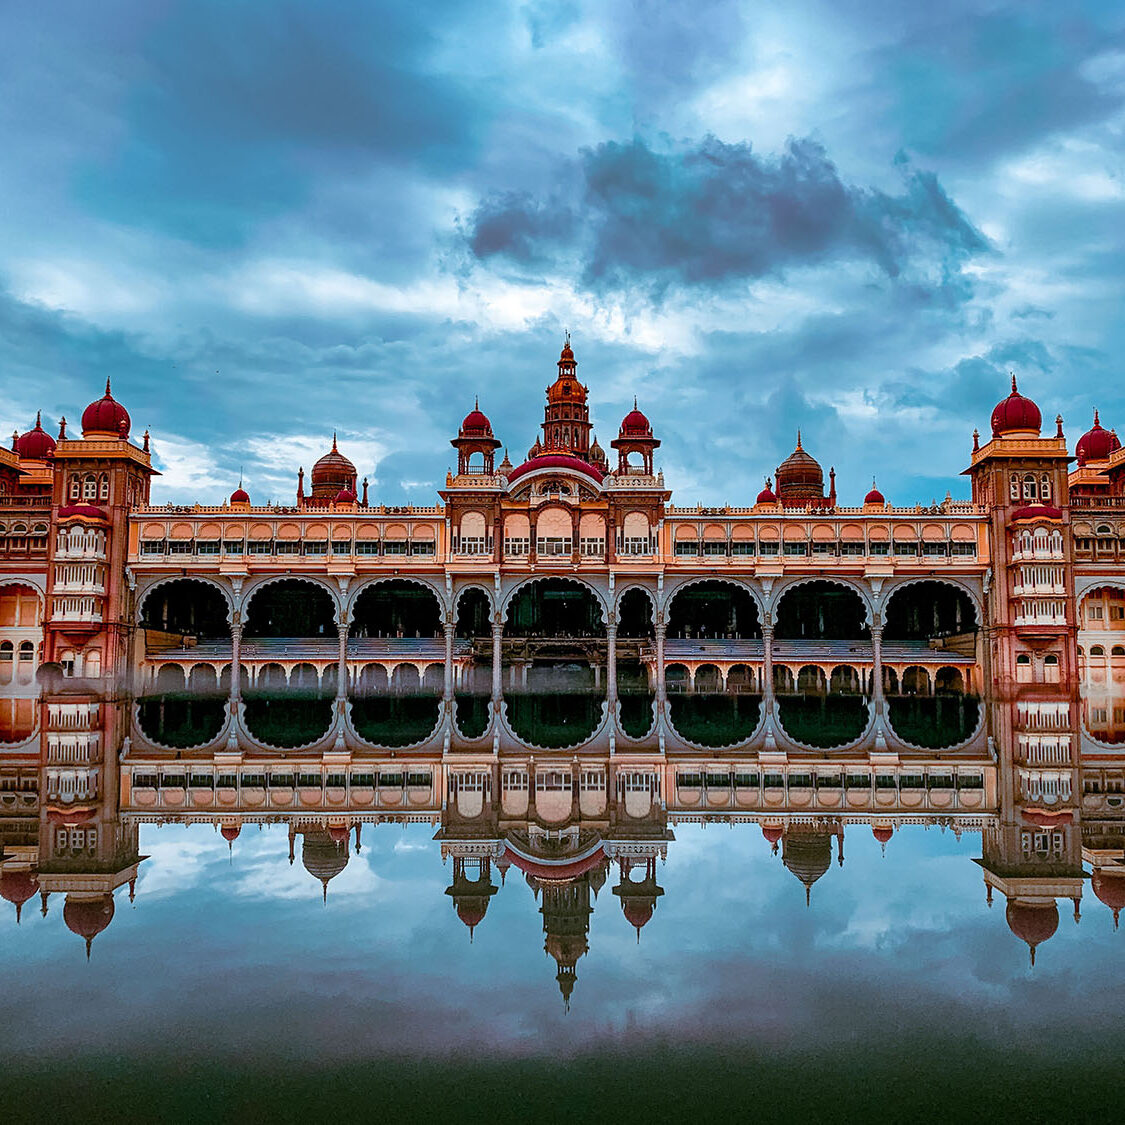 The beautiful Mysore palace of India under cloudy sky making mirror reflection in water